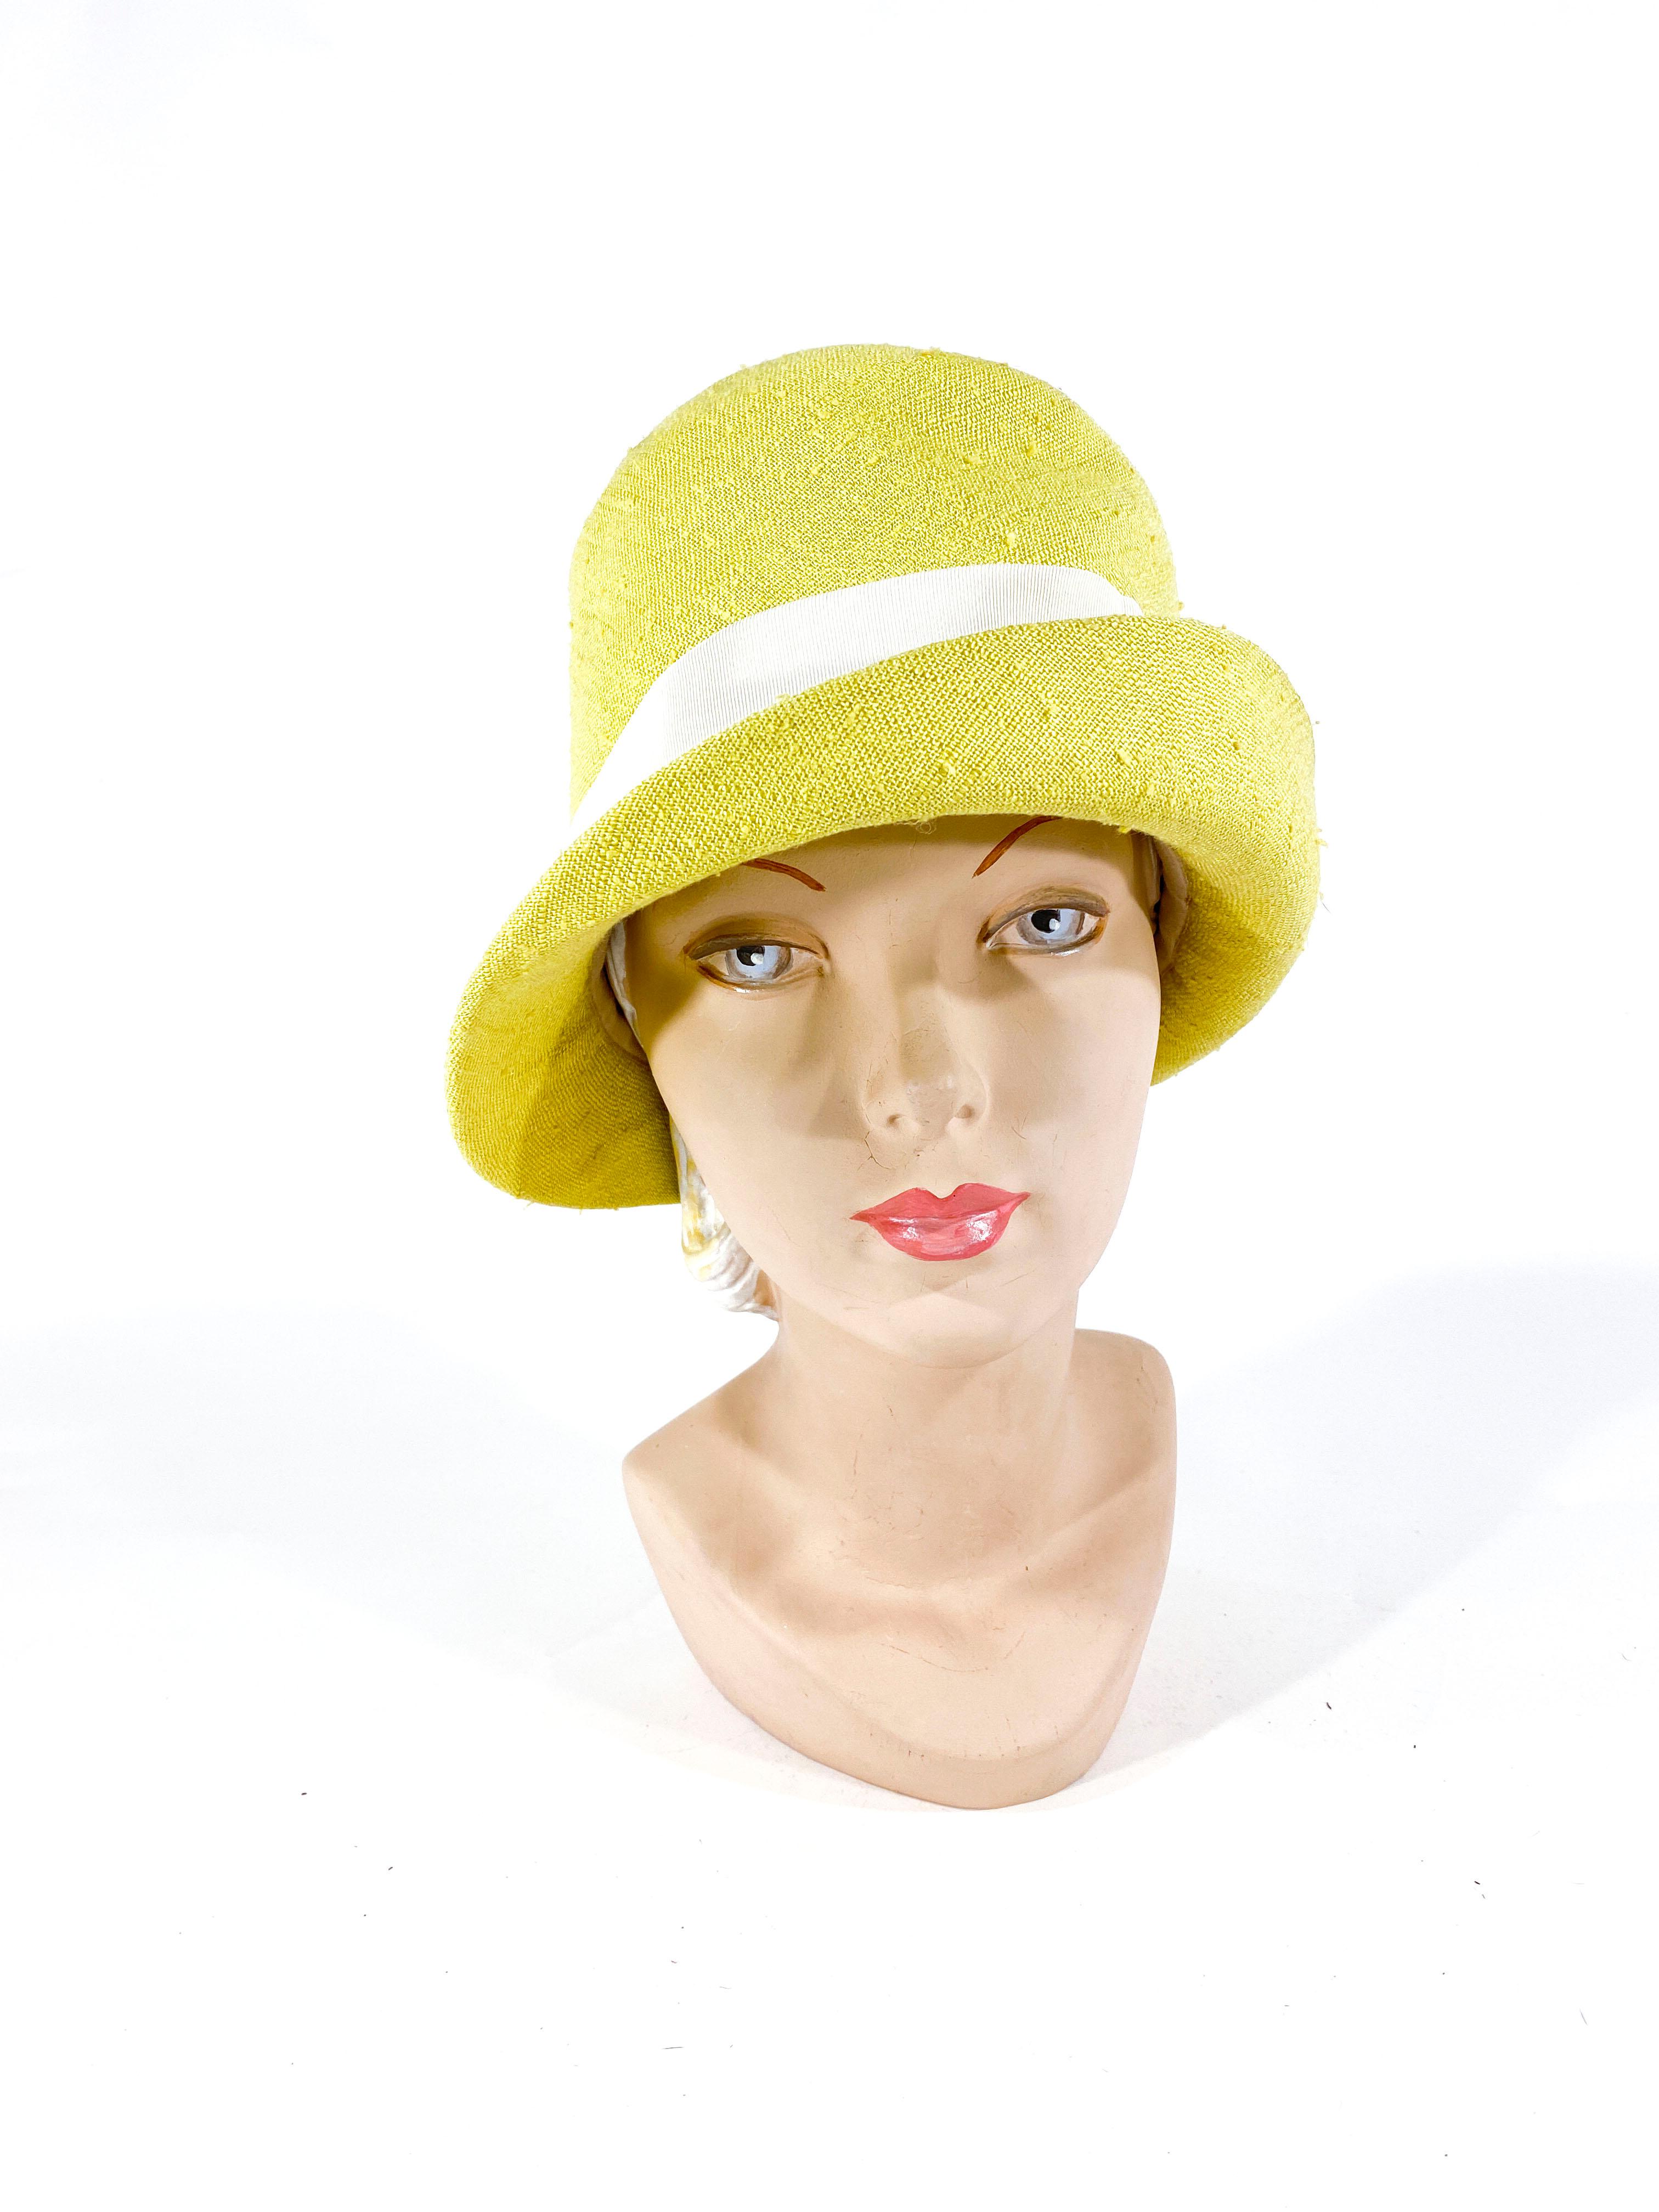 1960s Lilly Dache yellow-green linen hat with a grosgrain designer band and accent button.